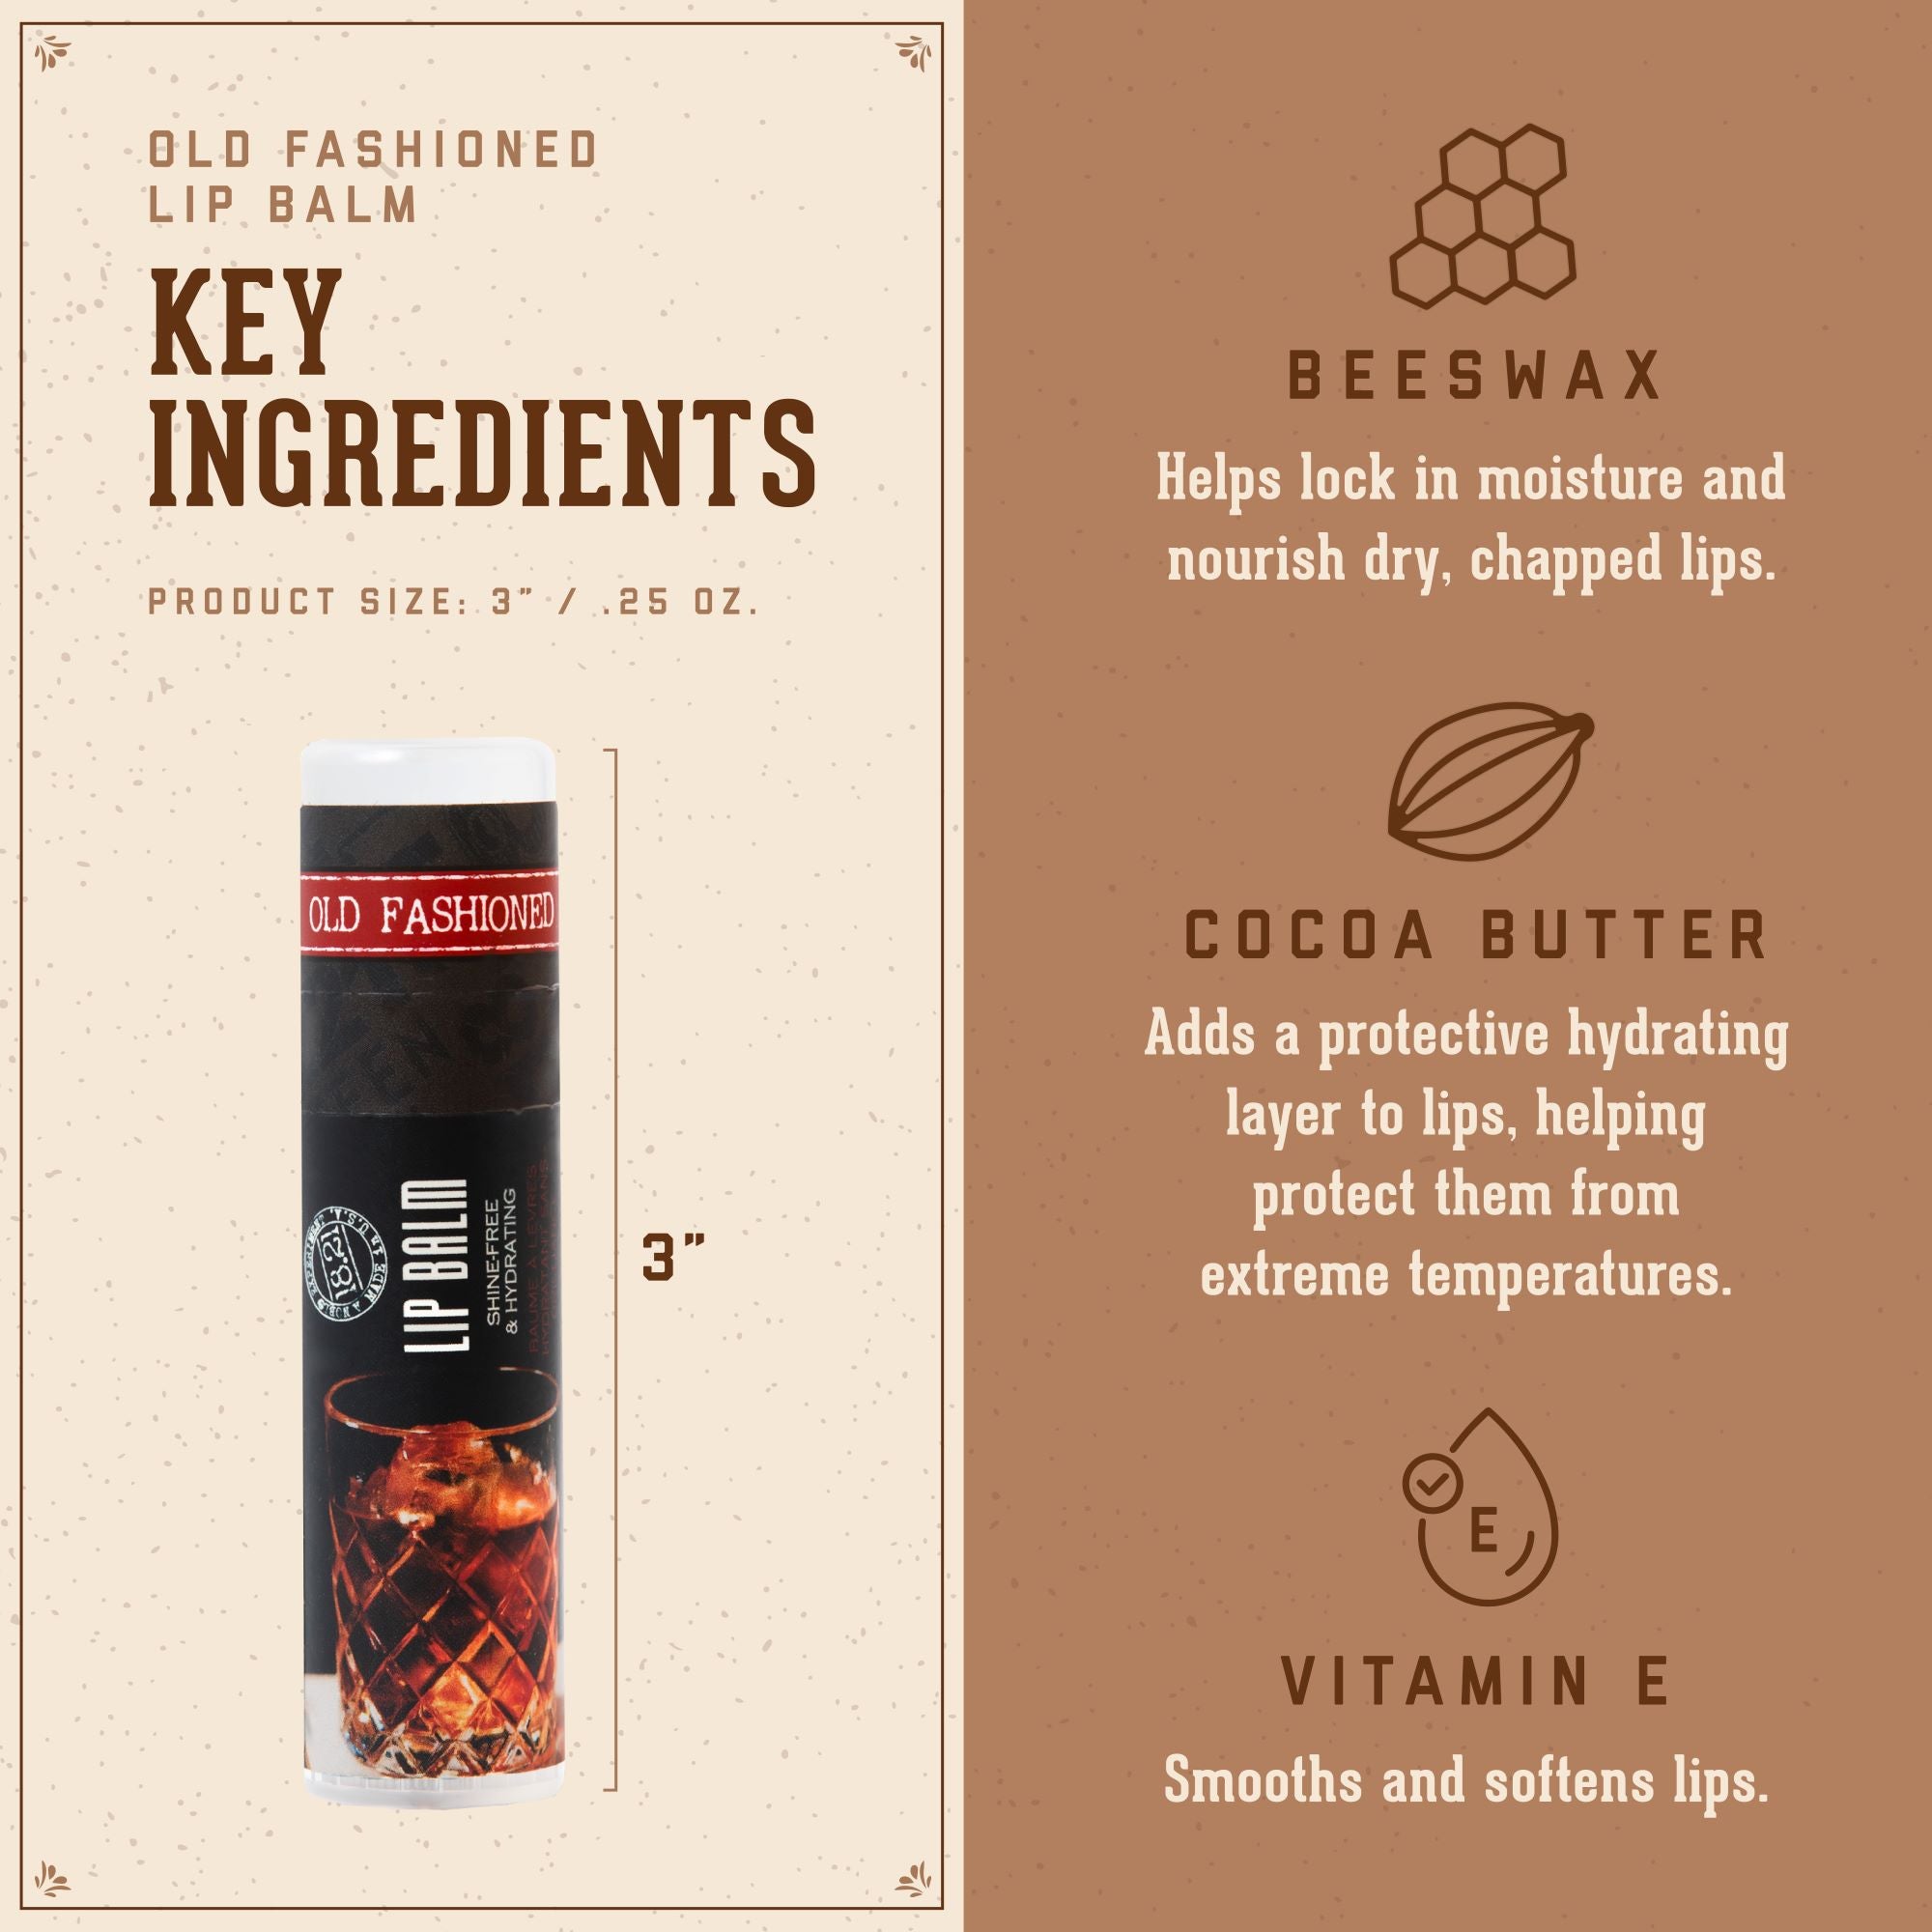 1821 Man Made Lip Balm Key Ingredients:   1. Beeswax: helps loc in moisture and nourish dry, chapped lips.     2. Cocoa Butter: Adds a protective hydrating layer to lips, helping protect them from extreme temperatures.      3. Vitamin E: smooths and softens lips